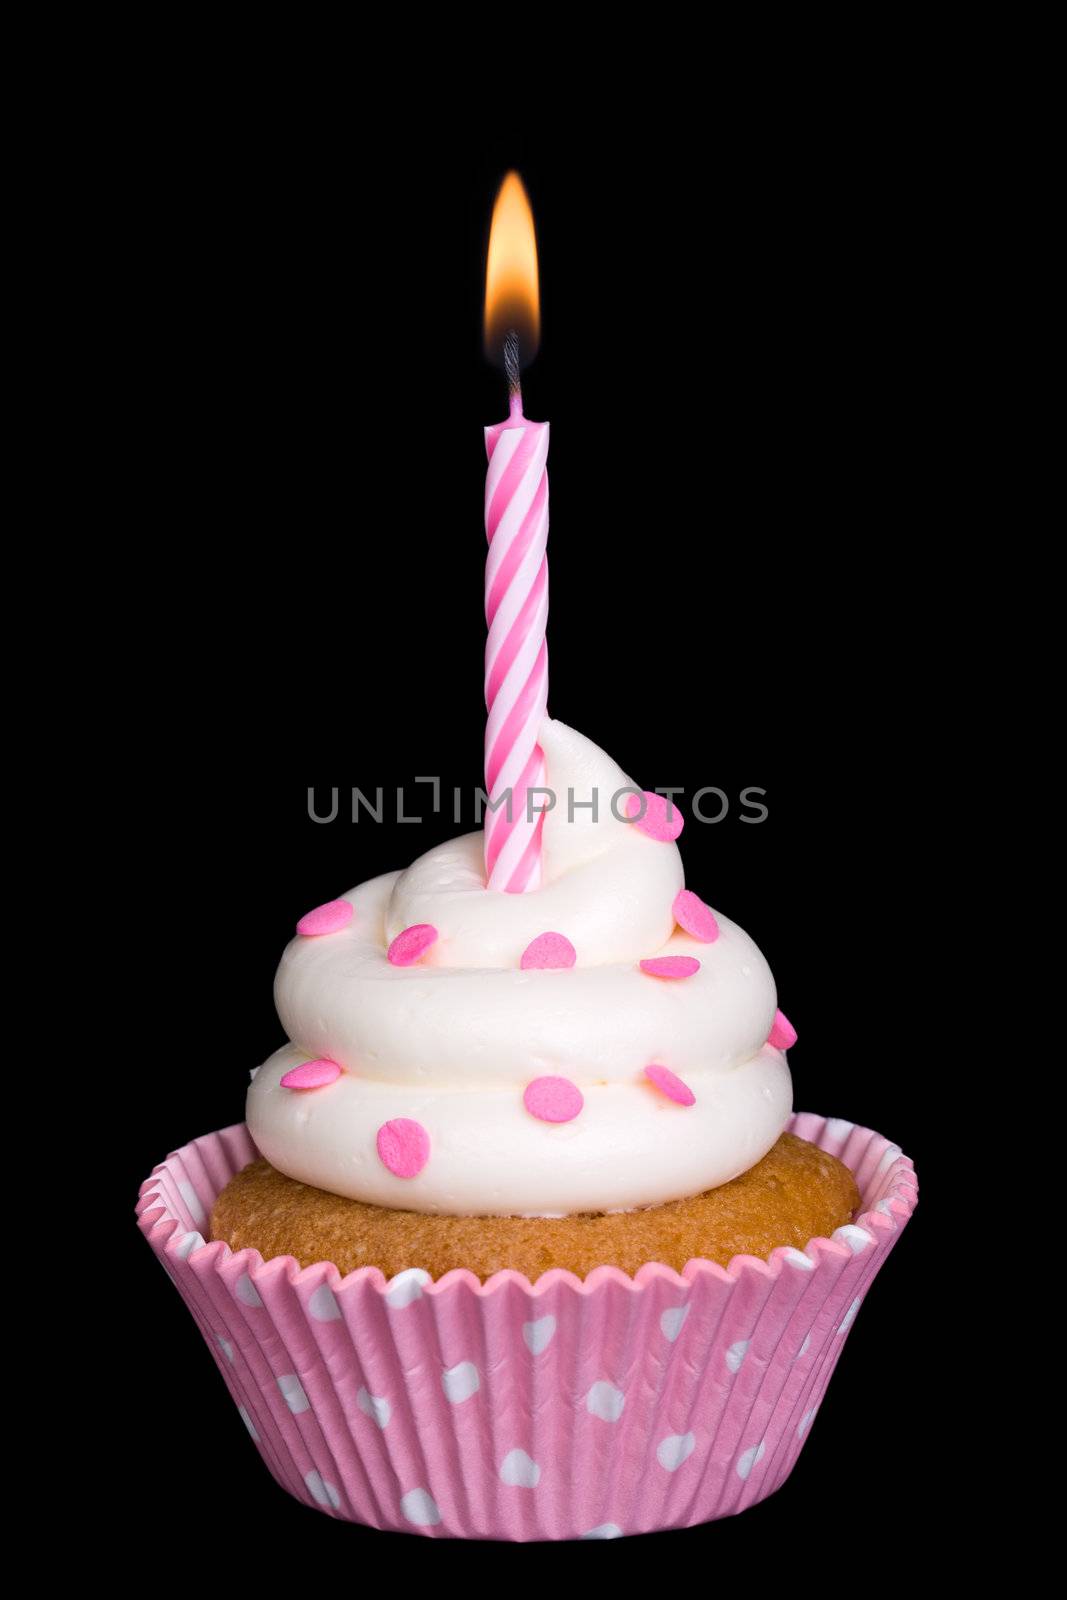 Spotty pink cupcake with a single candle against black